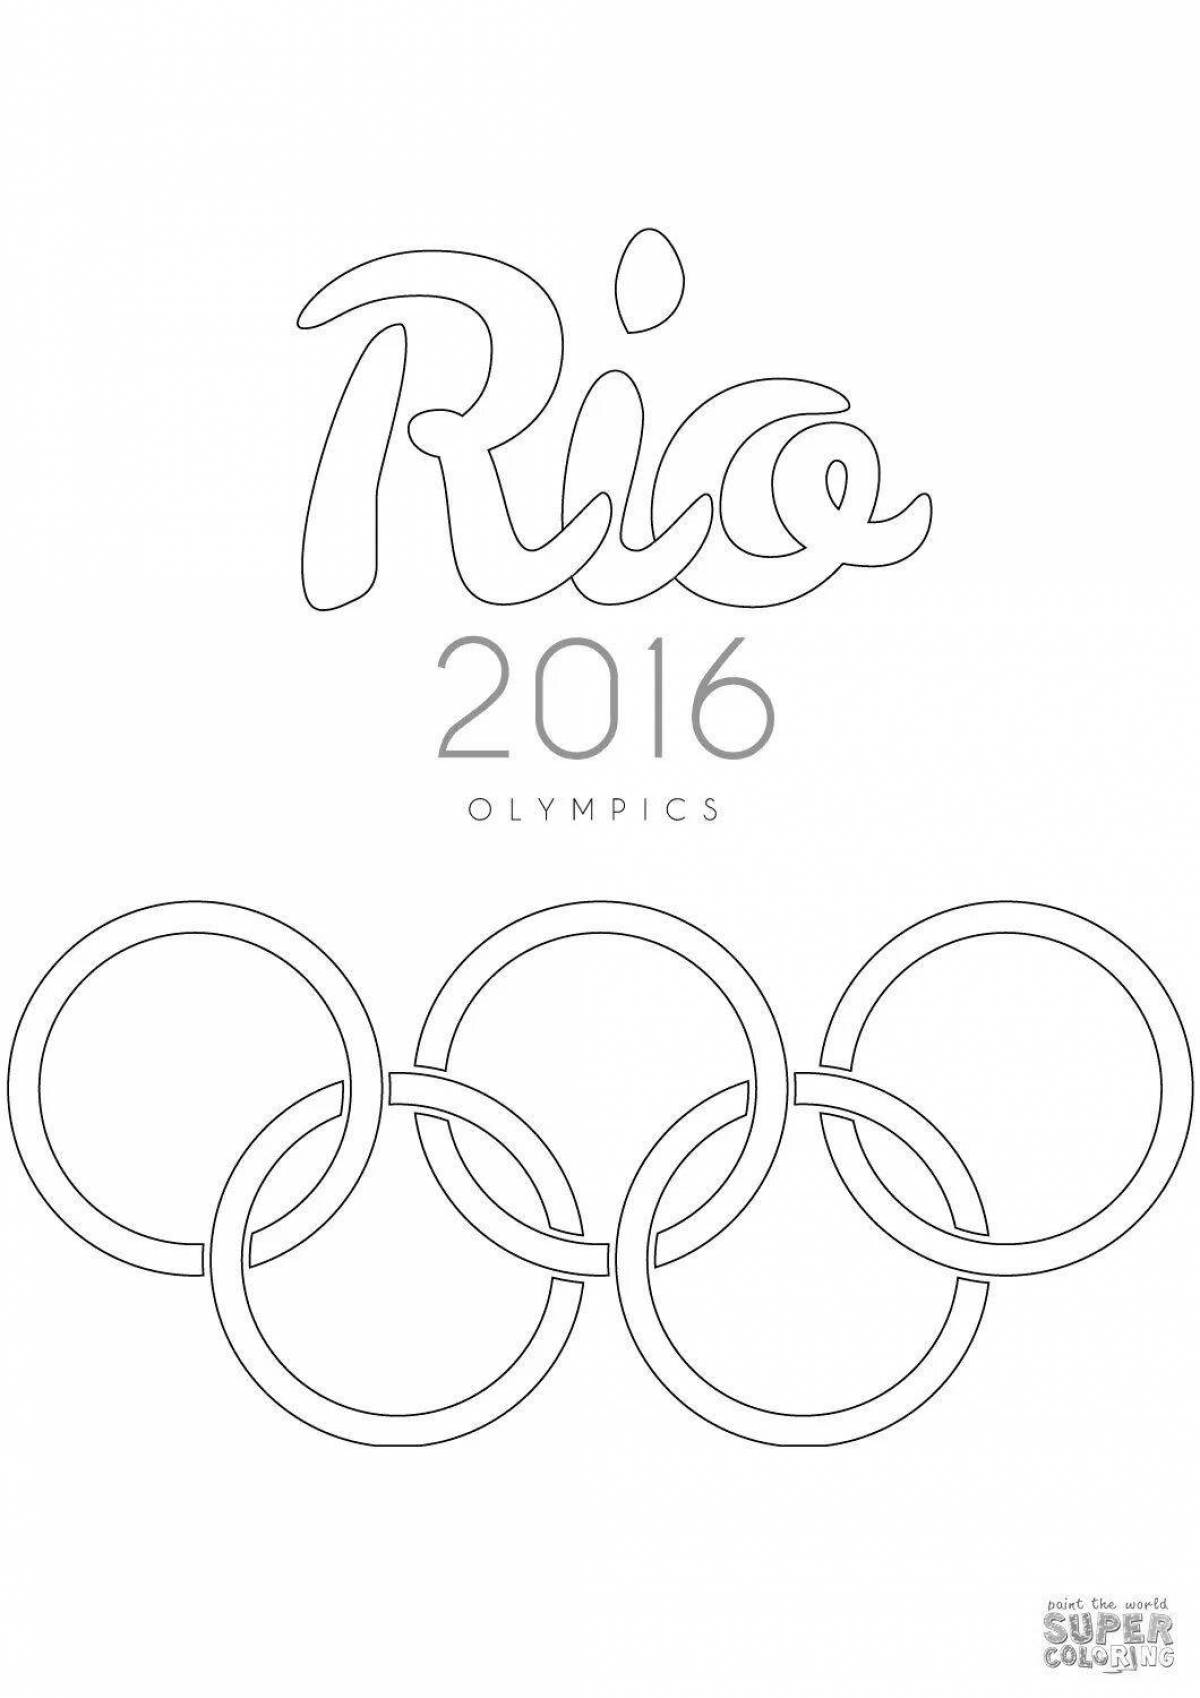 Impressive olympic rings coloring book